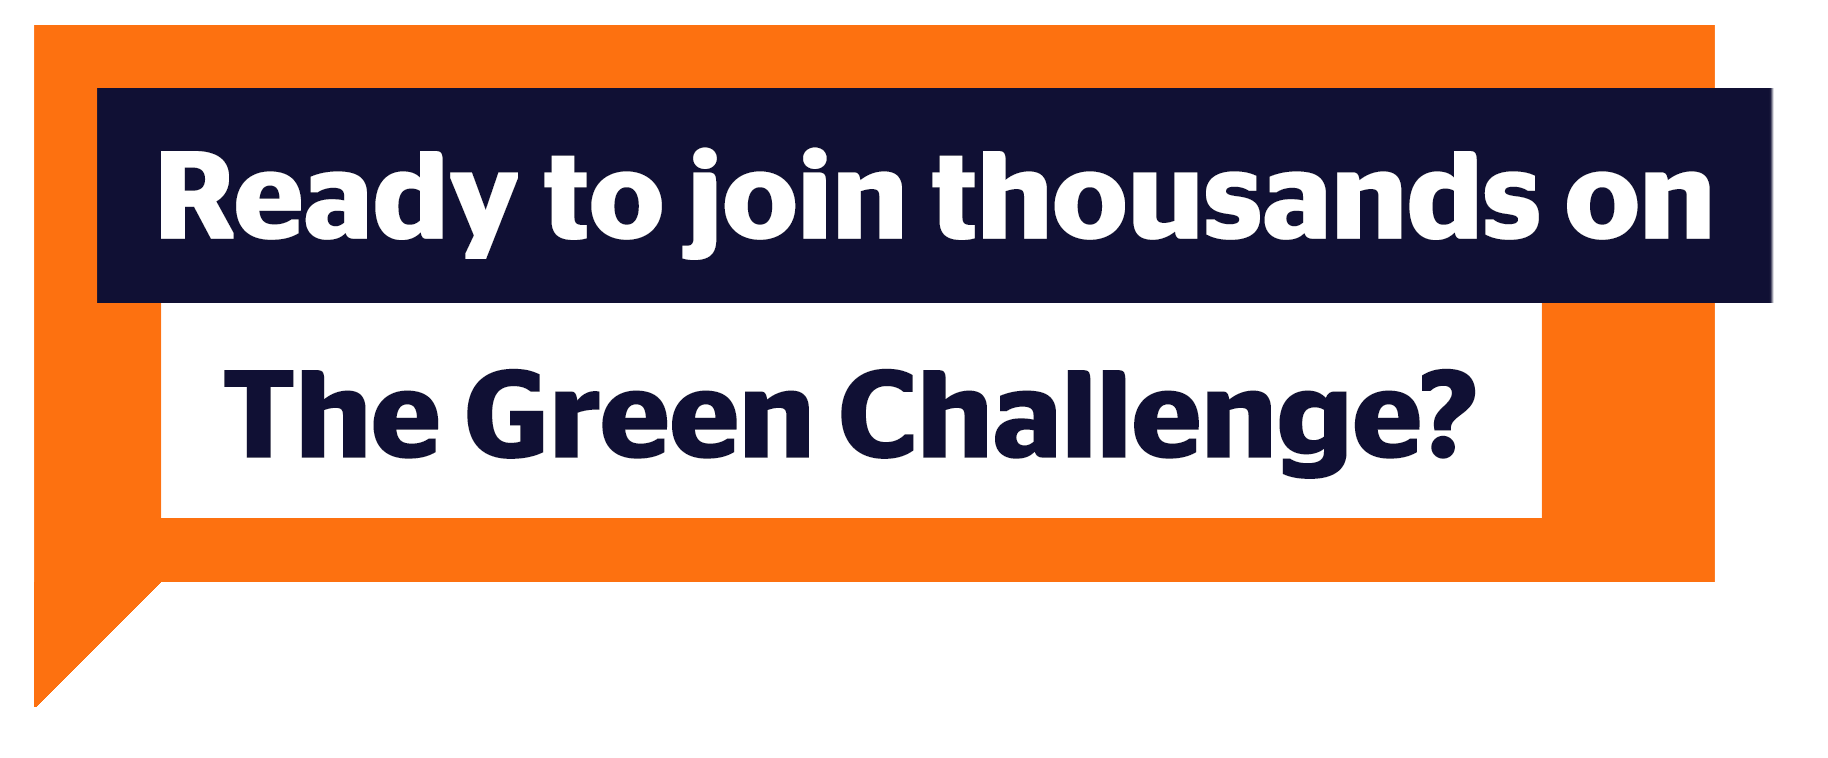 Ready to join thousands on the green challenge?: https://www.togethertv.com/greenchallenge